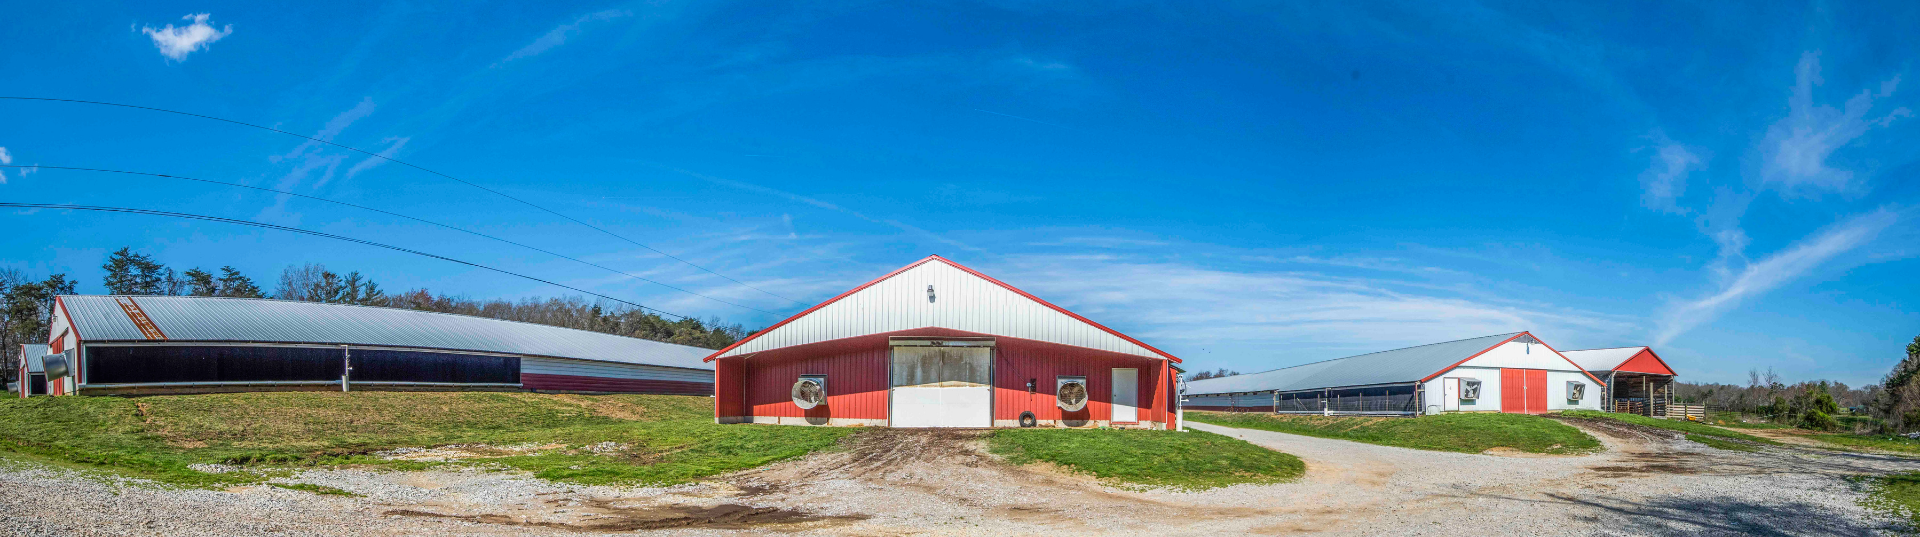 poultry farm for sale in tennessee